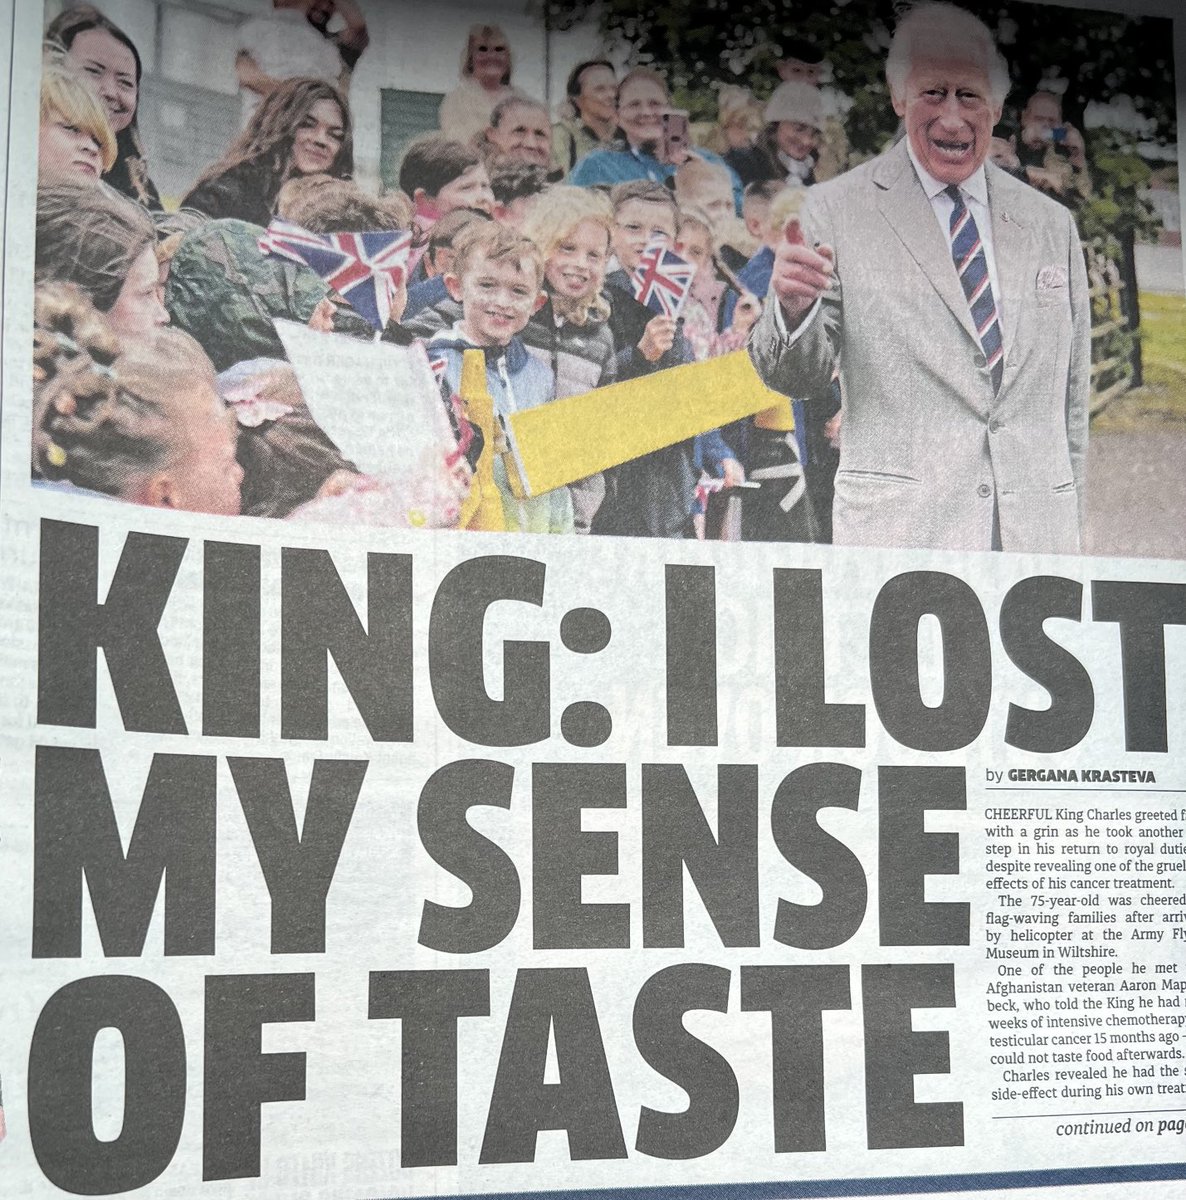 Mate you lost this as soon as you started shagging Camilla 
#NotMyKing #AbolishTheMonarchy